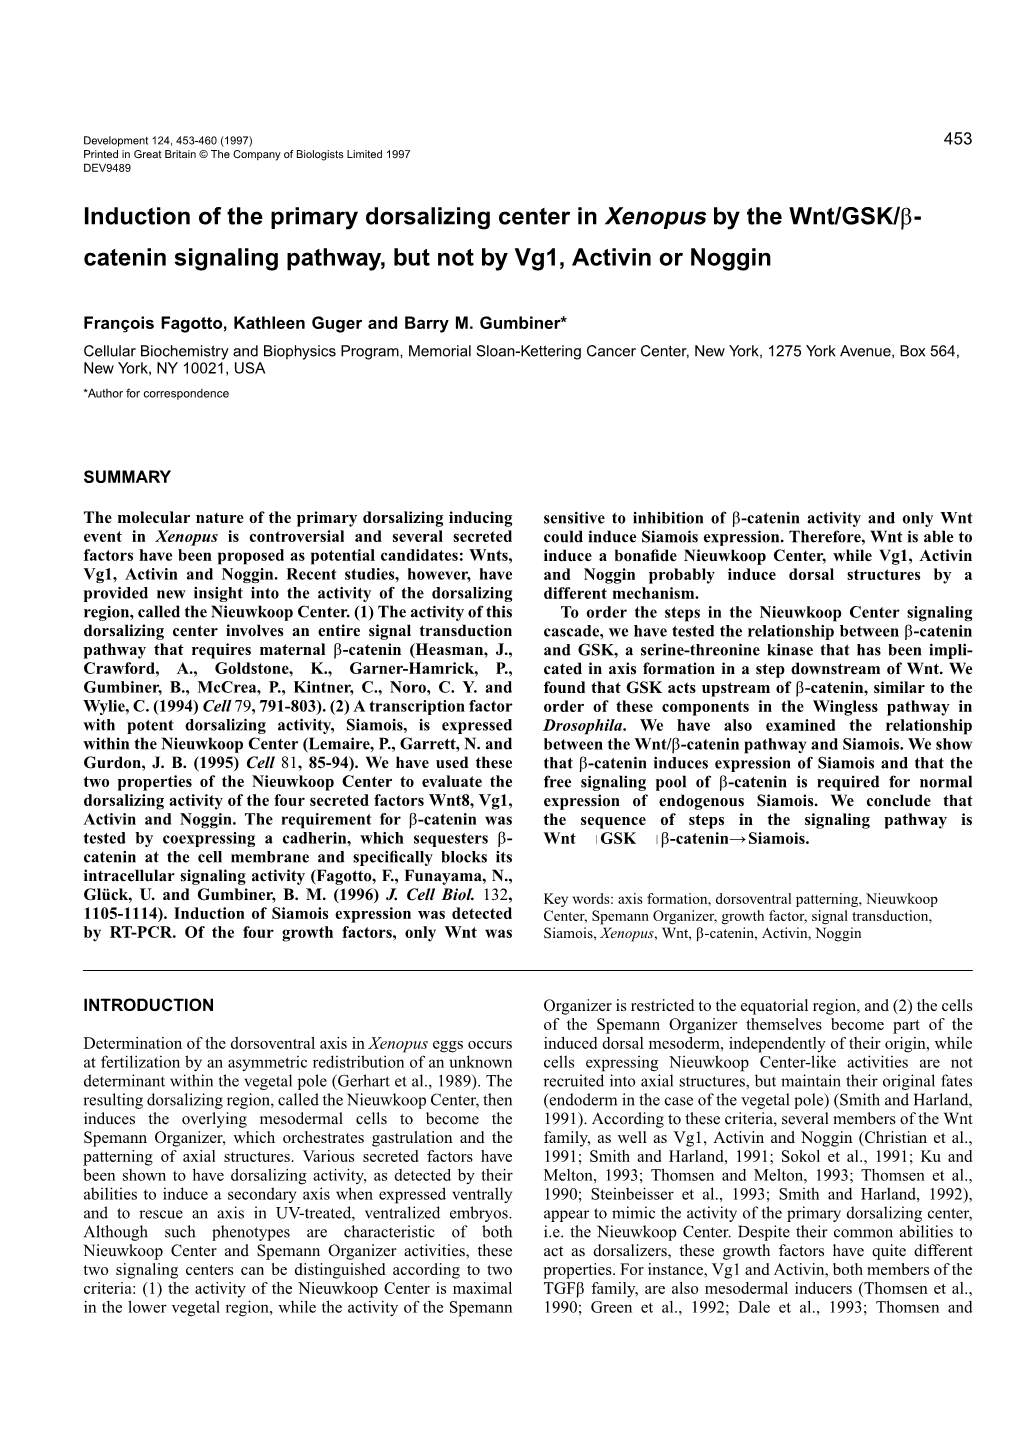 Catenin Signaling Pathway, but Not by Vg1, Activin Or Noggin